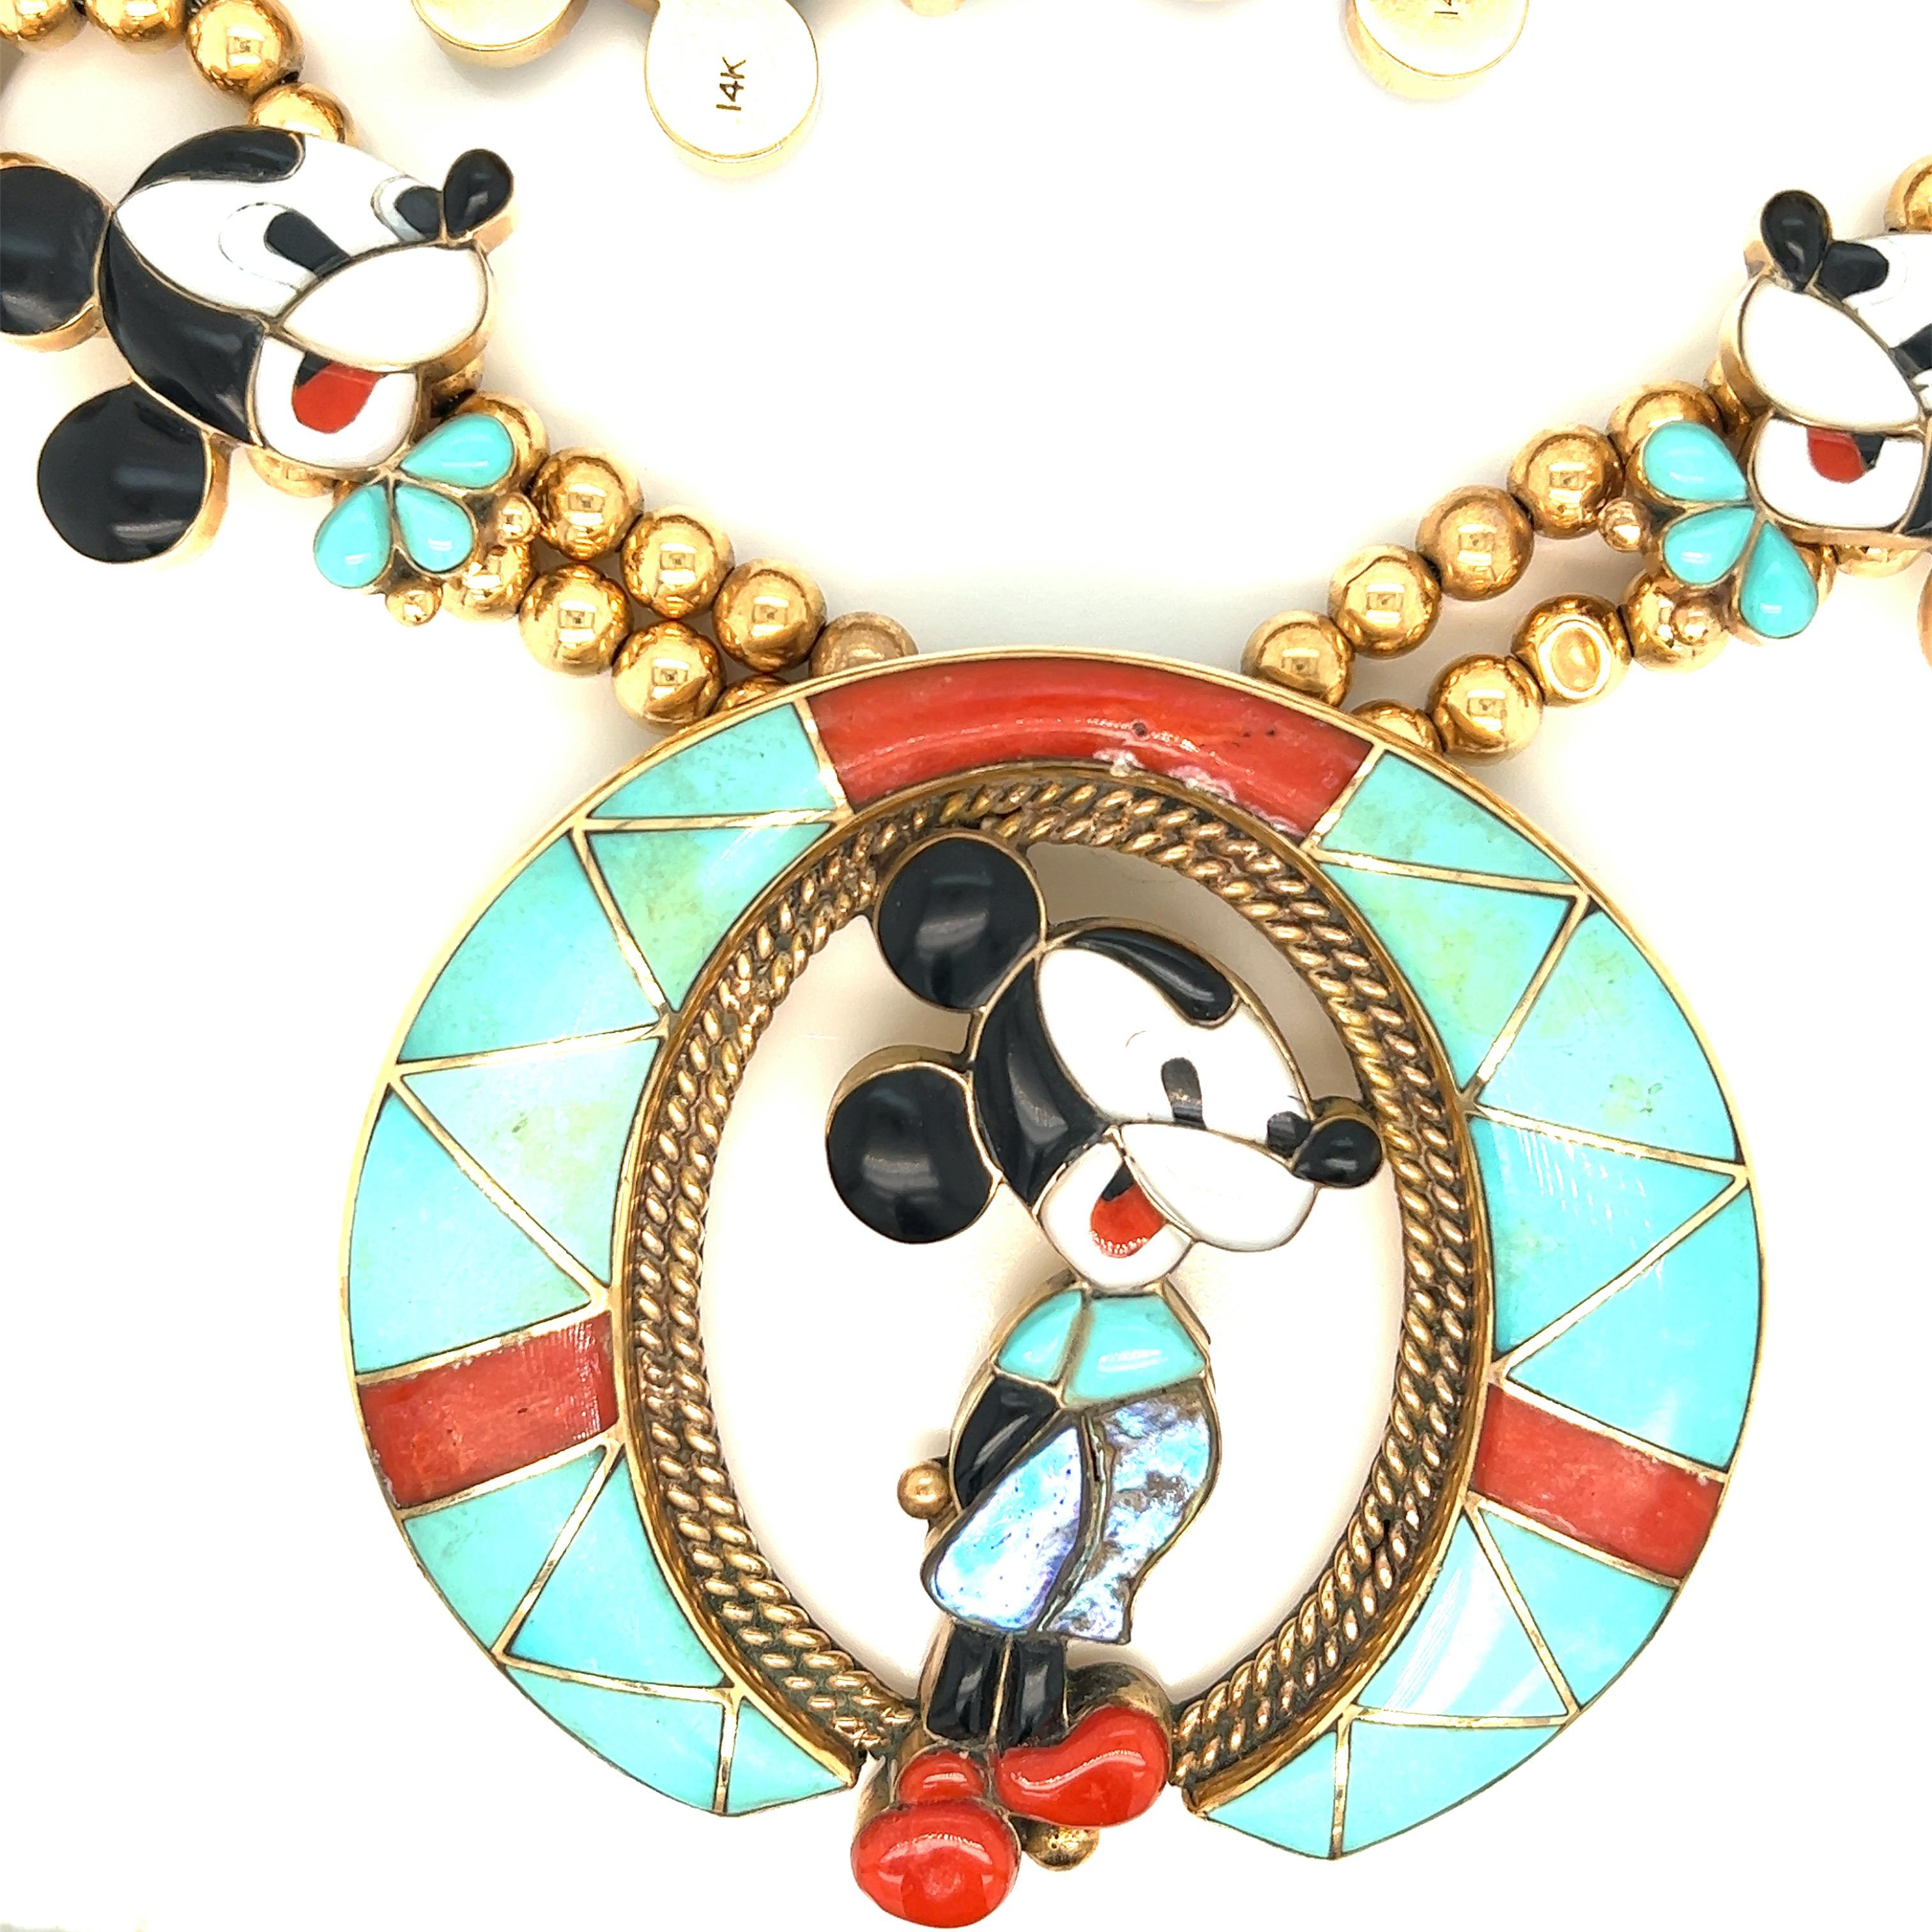 Veronica Poblano Mickey Mouse multi-gem gold double strand necklace, circa 1970s

Black onyx, mother-of-pearl, inlaid turquoise, abalone shell, and coral, 14 karat yellow gold; marked 14kt, with maker's mark 

Size: width 3 inches, length 2.75